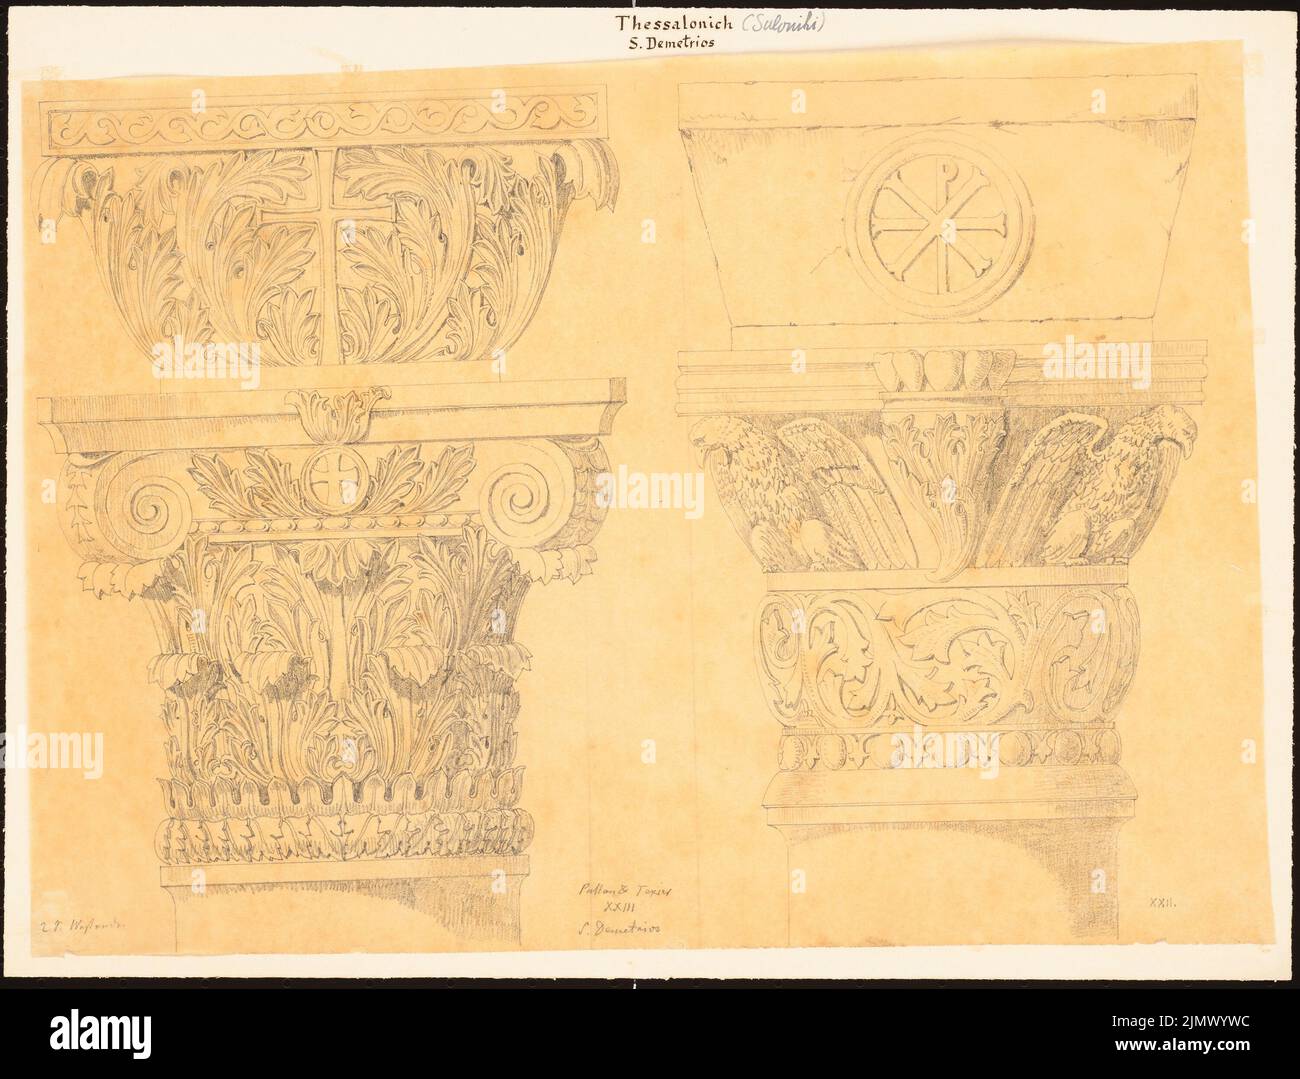 Quast Ferdinand von (1807-1877), S. Demetrios in Saloniki/Thessaloniki (without Dat.): Carriage: Views of two columns with Christ monogram and wheel cross, according to Charles Texier and Richard P. Pullan, XXIII and XXII. Pencil on transparent, 29.1 x 38.3 cm (including scan edges) Quast Ferdinand von  (1807-1877): S. Demetrios, Thessaloniki Stock Photo